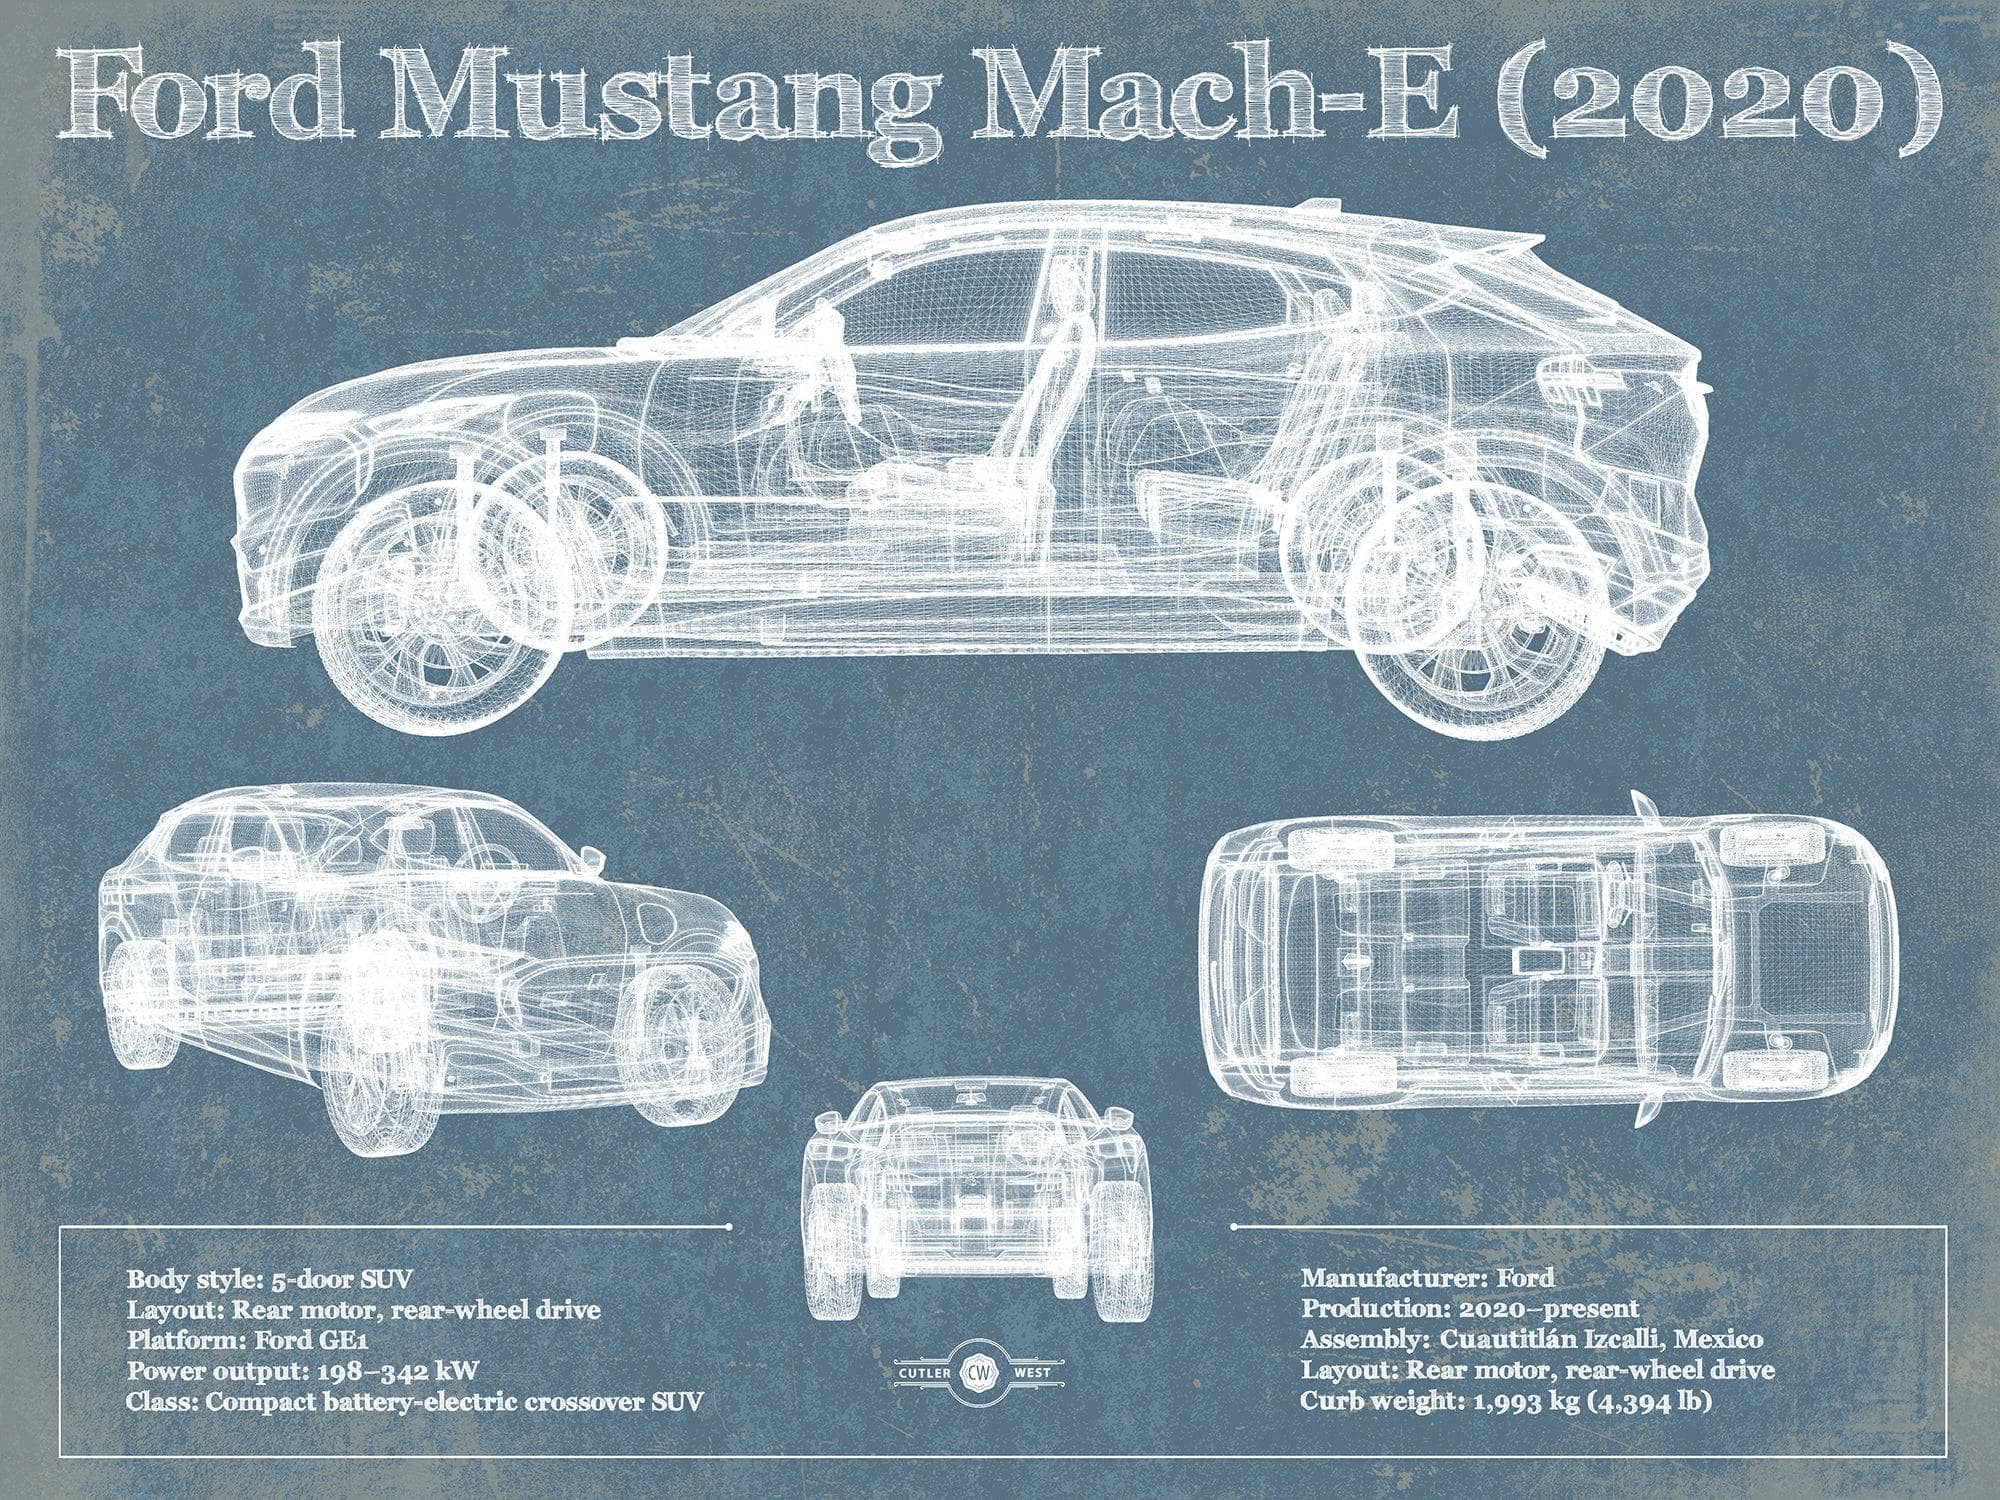 Cutler West Ford Collection 14" x 11" / Unframed Ford Mustang Mach-E 2020 Blueprint Vintage Auto Print 890461895_11672